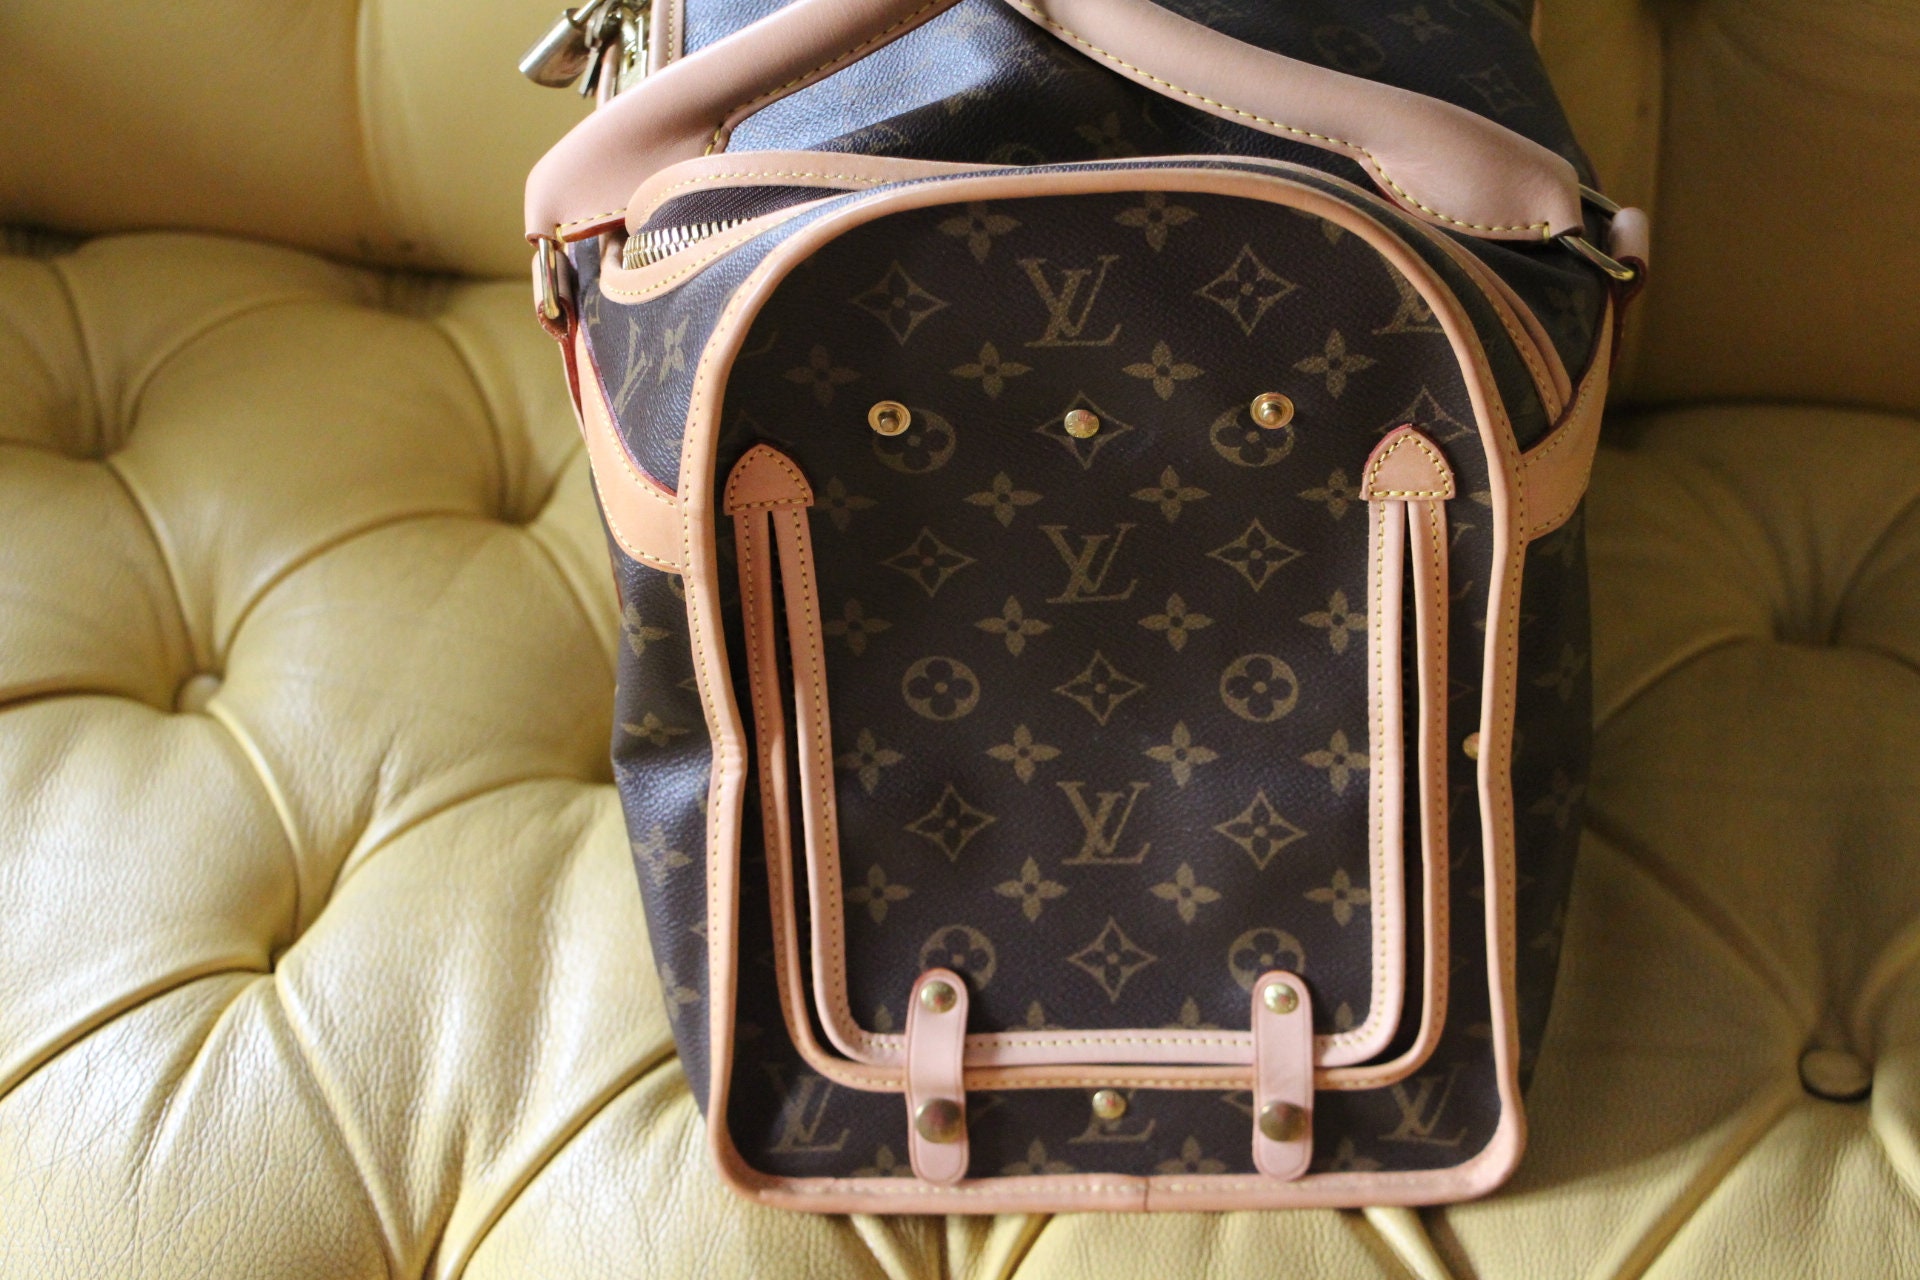 dog louis vuitton backpack